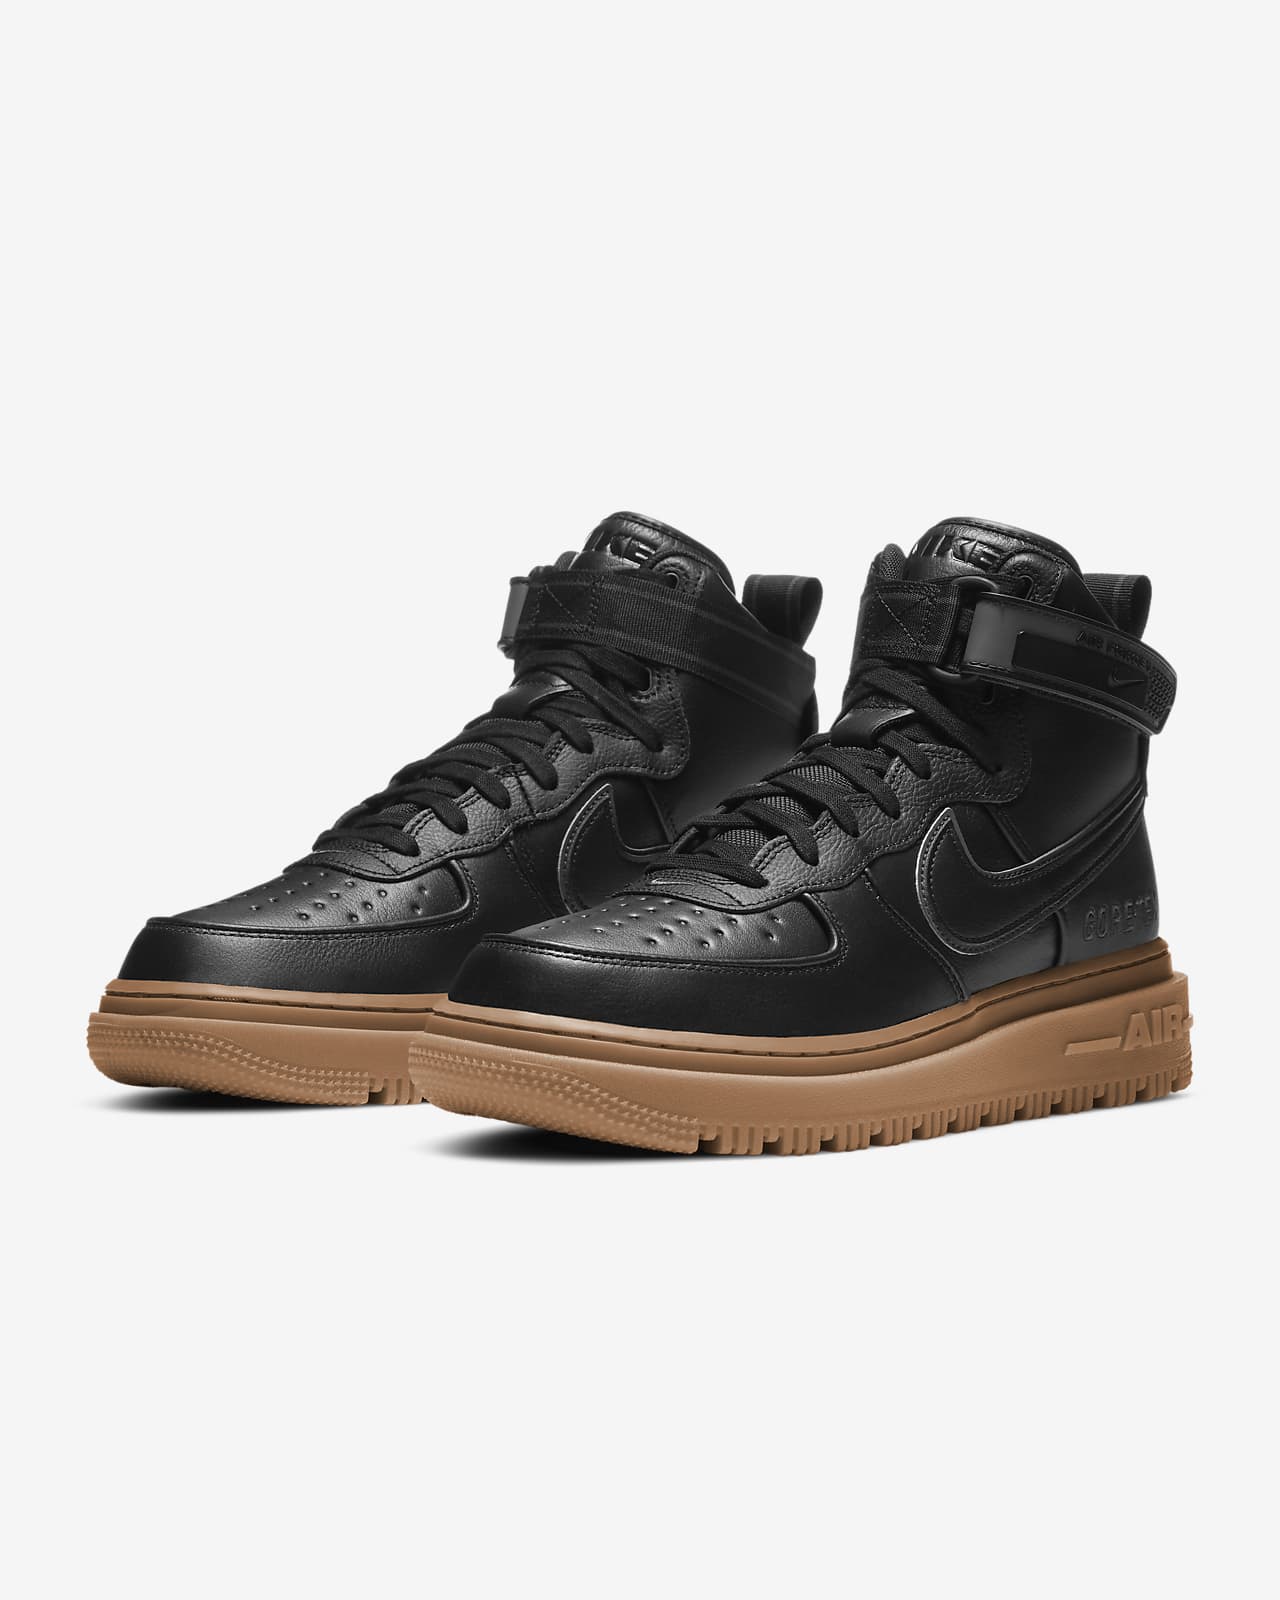 nike air force one boots black